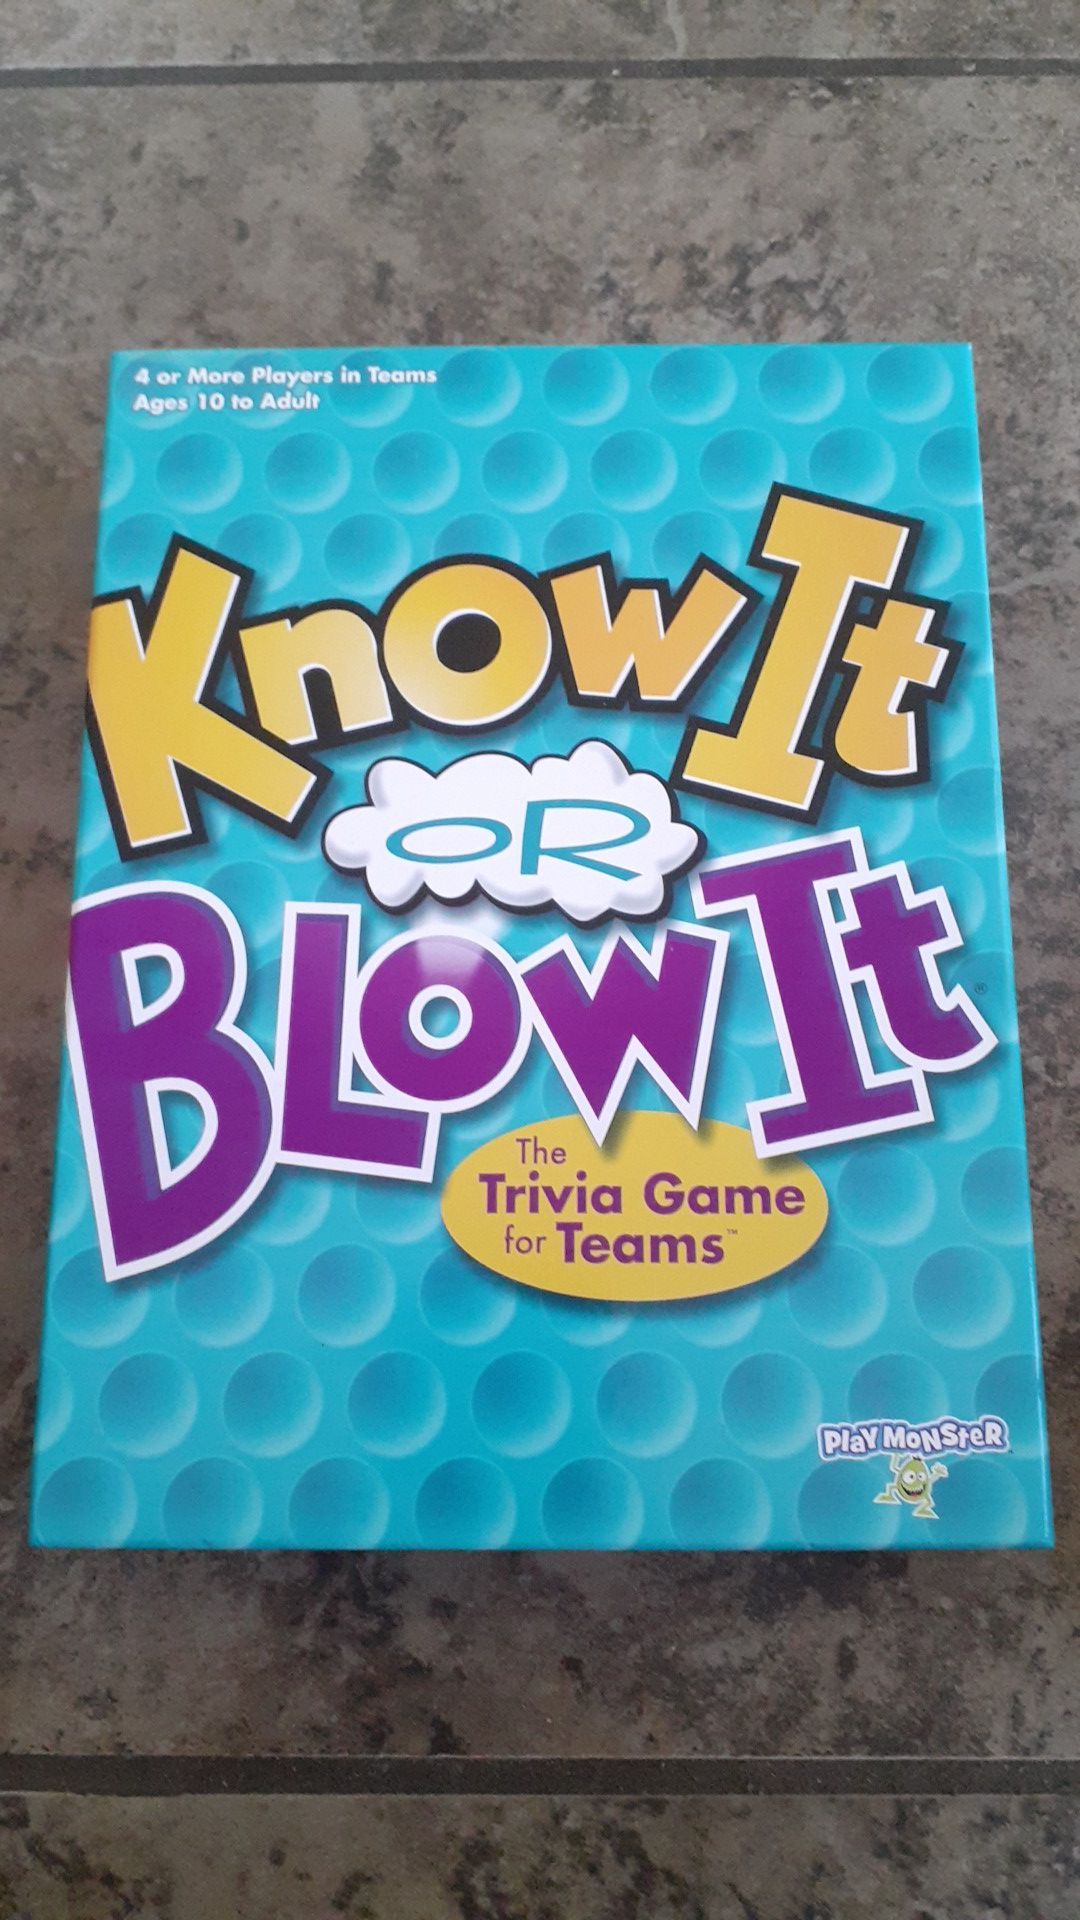 Know it or blow it trivia game by play monster